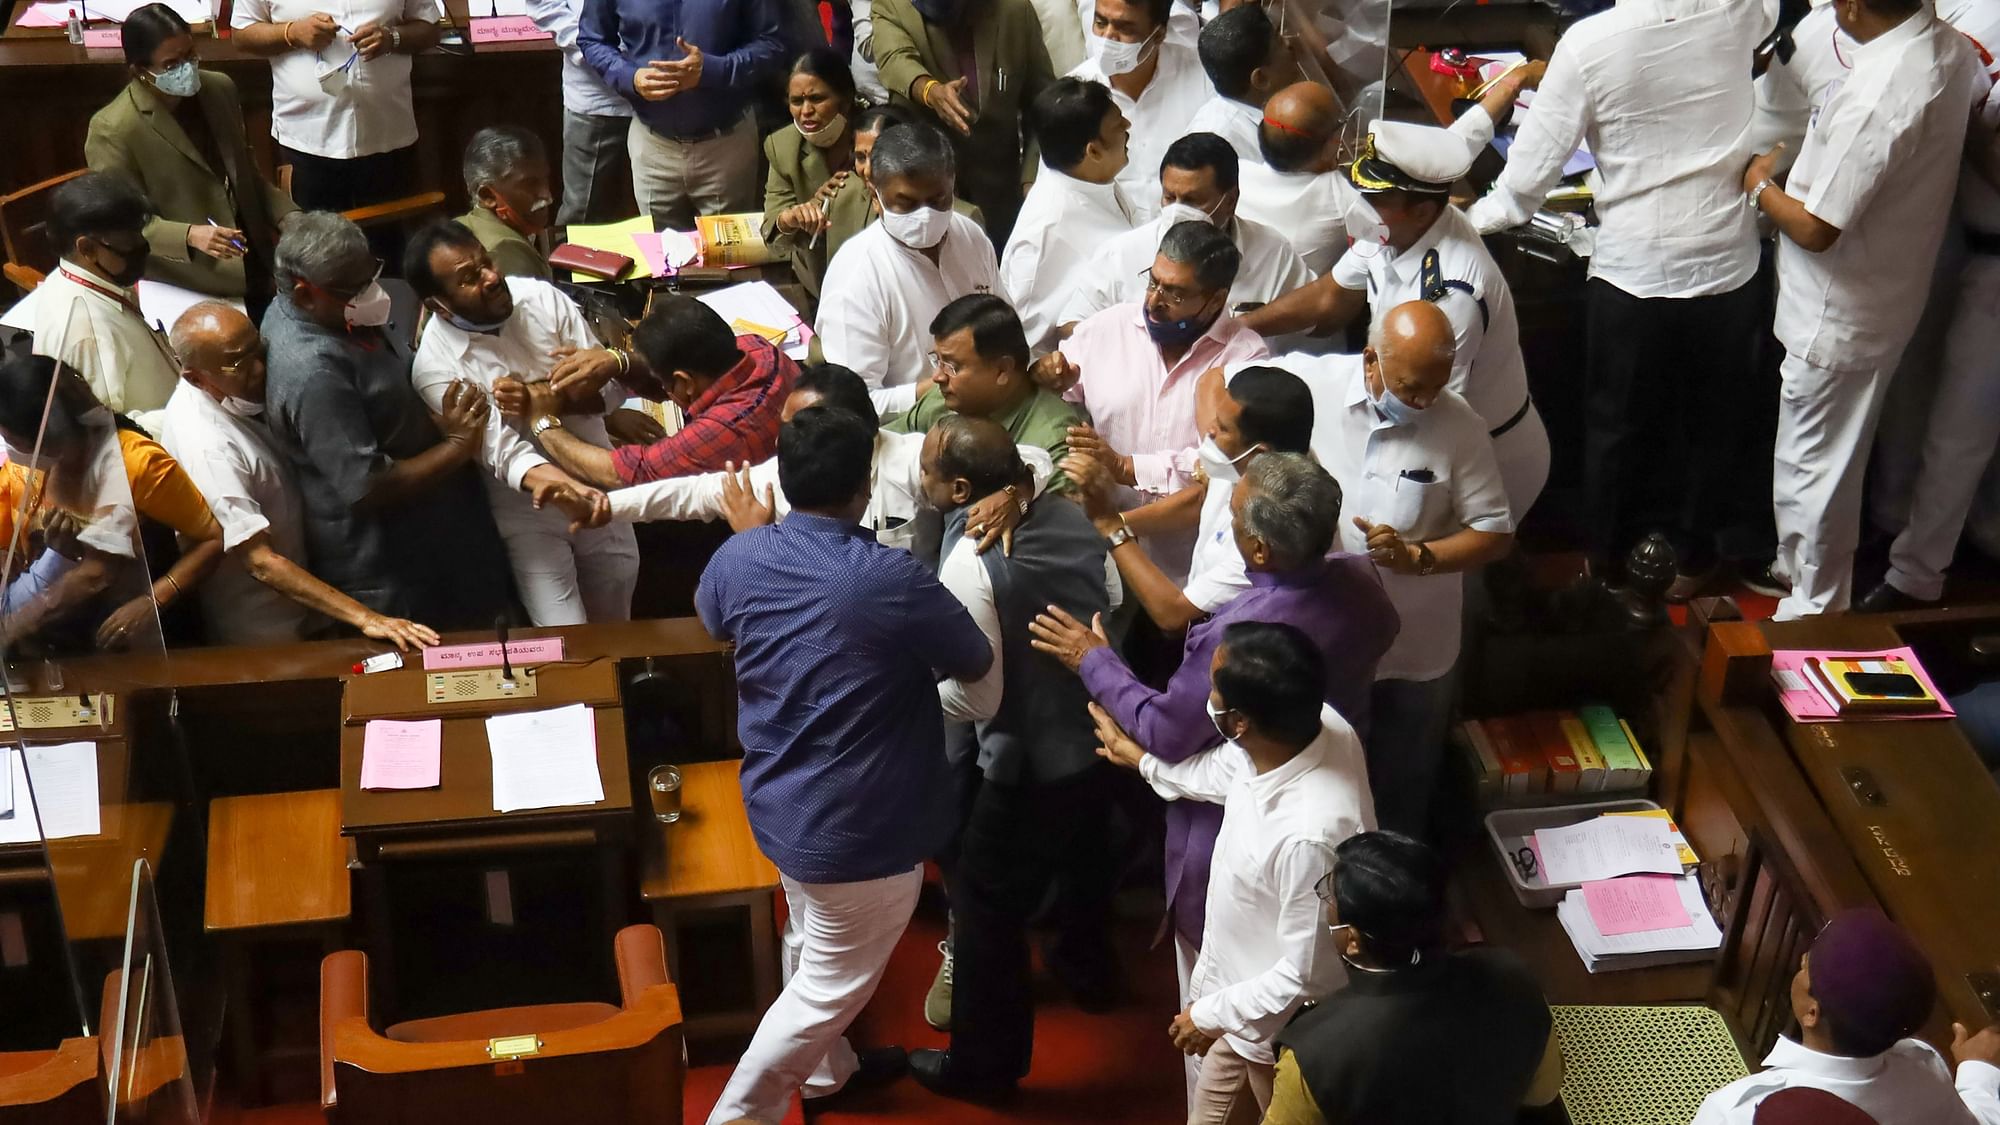 BJP members reportedly prevented the Chairman from chairing the one-day session, while Congress members in the House evicted the Deputy Chairman from the chair.